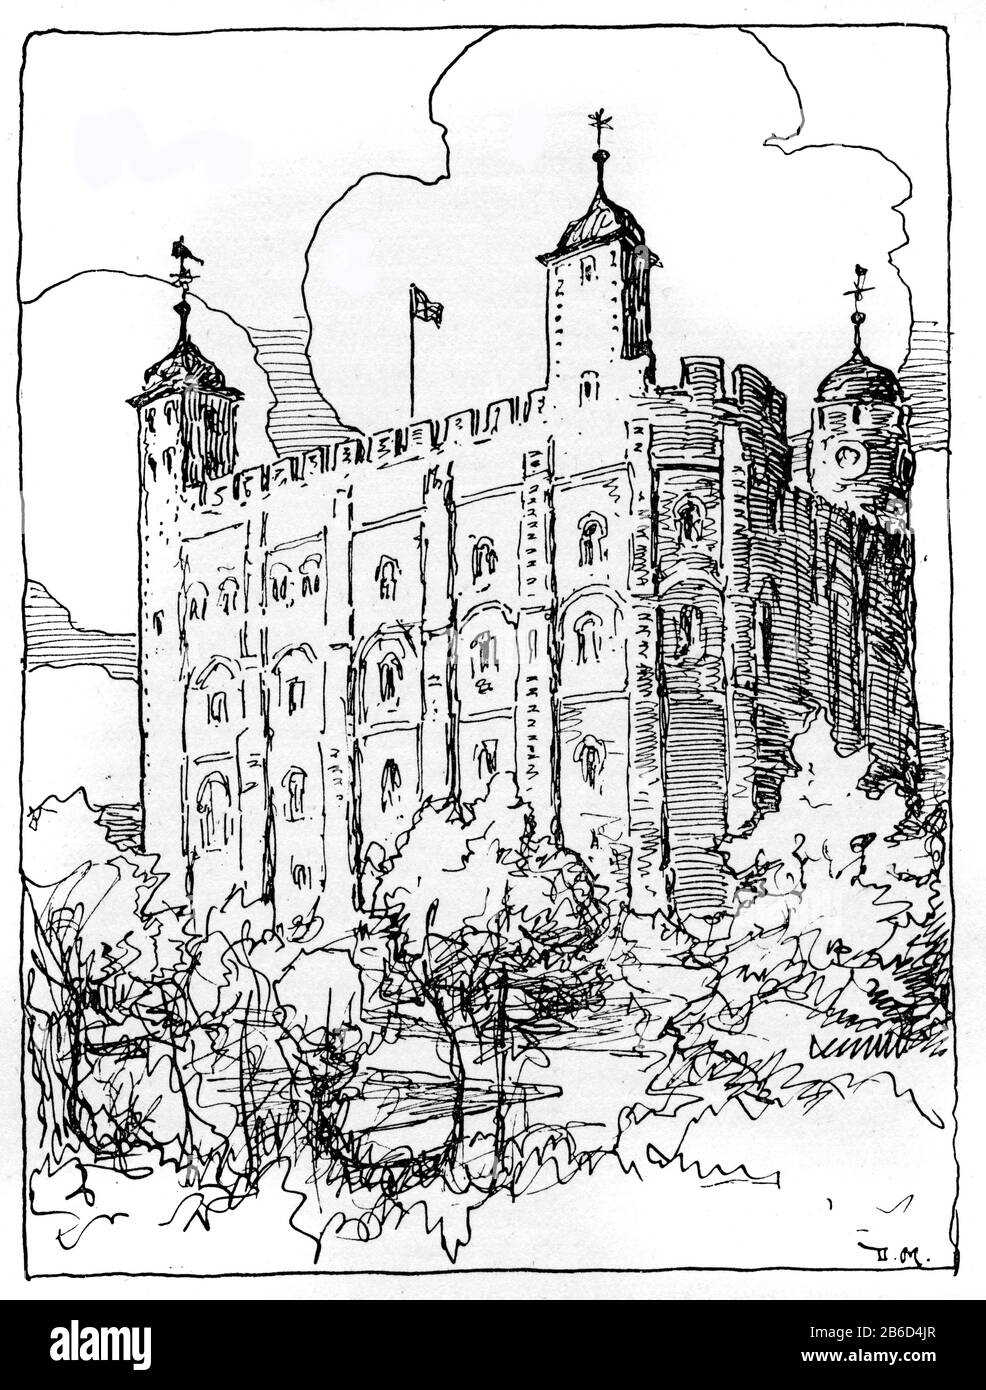 The White Tower, Tower of London, London, c1926. By Donald Maxwell (1877-1936). The Tower of London, officially Her Majesty's Royal Palace and Fortress of the Tower of London, was founded towards the end of 1066 as part of the Norman Conquest of England. The White Tower is the central tower (the old keep) at the Tower of London. It was built by William the Conqueror during the early 1080s, and subsequently extended. Stock Photo